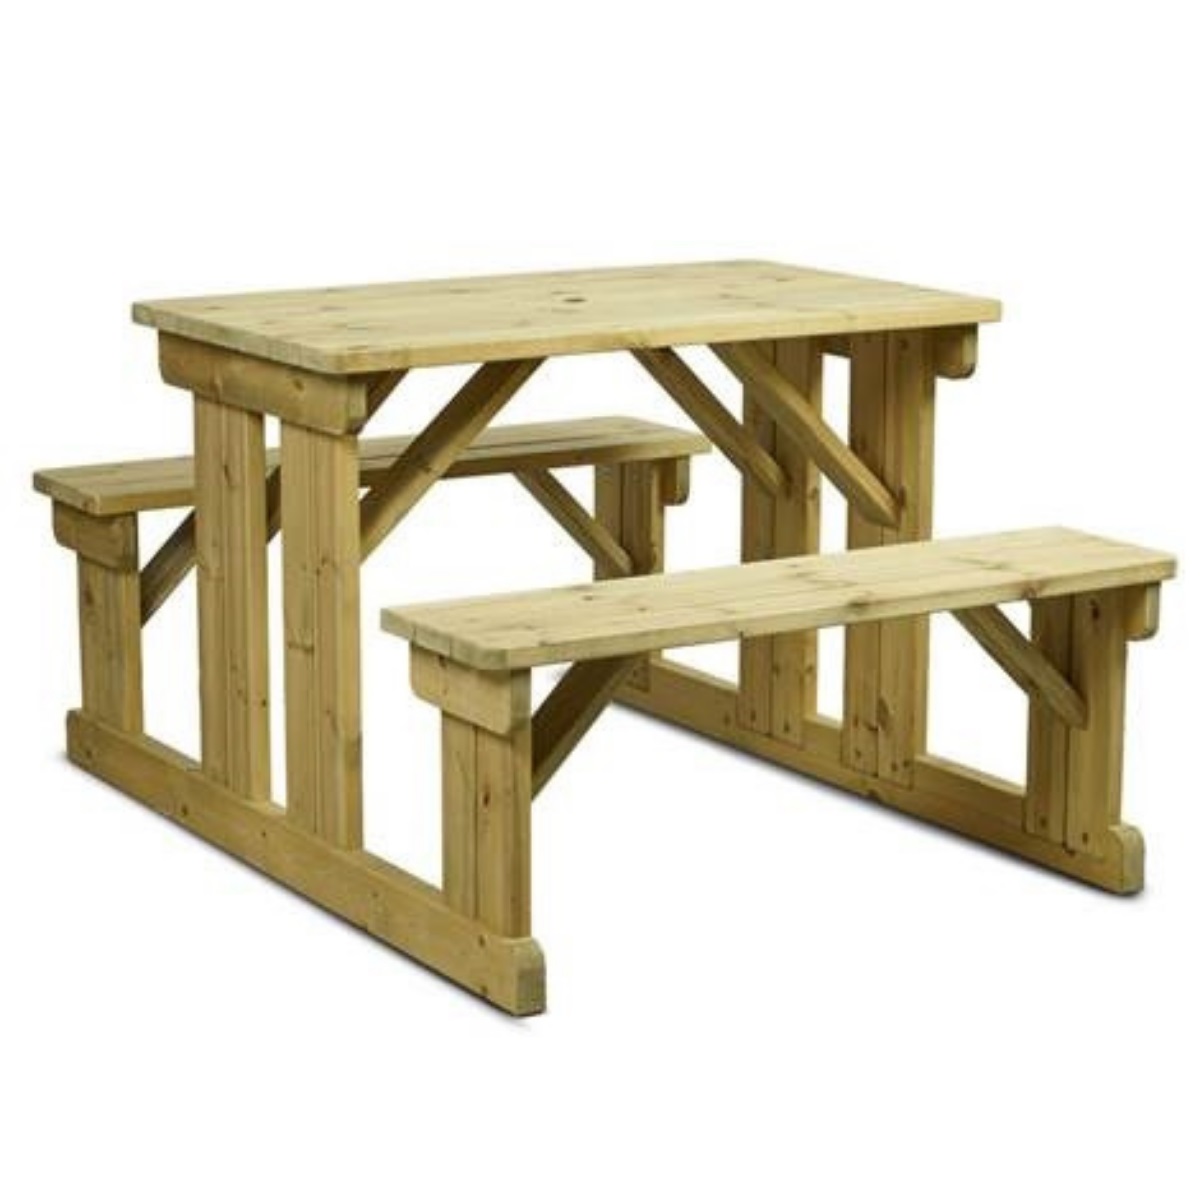 A rectangular wooden 6 seater picnic table with easy access bench seats that you don't have to climb over